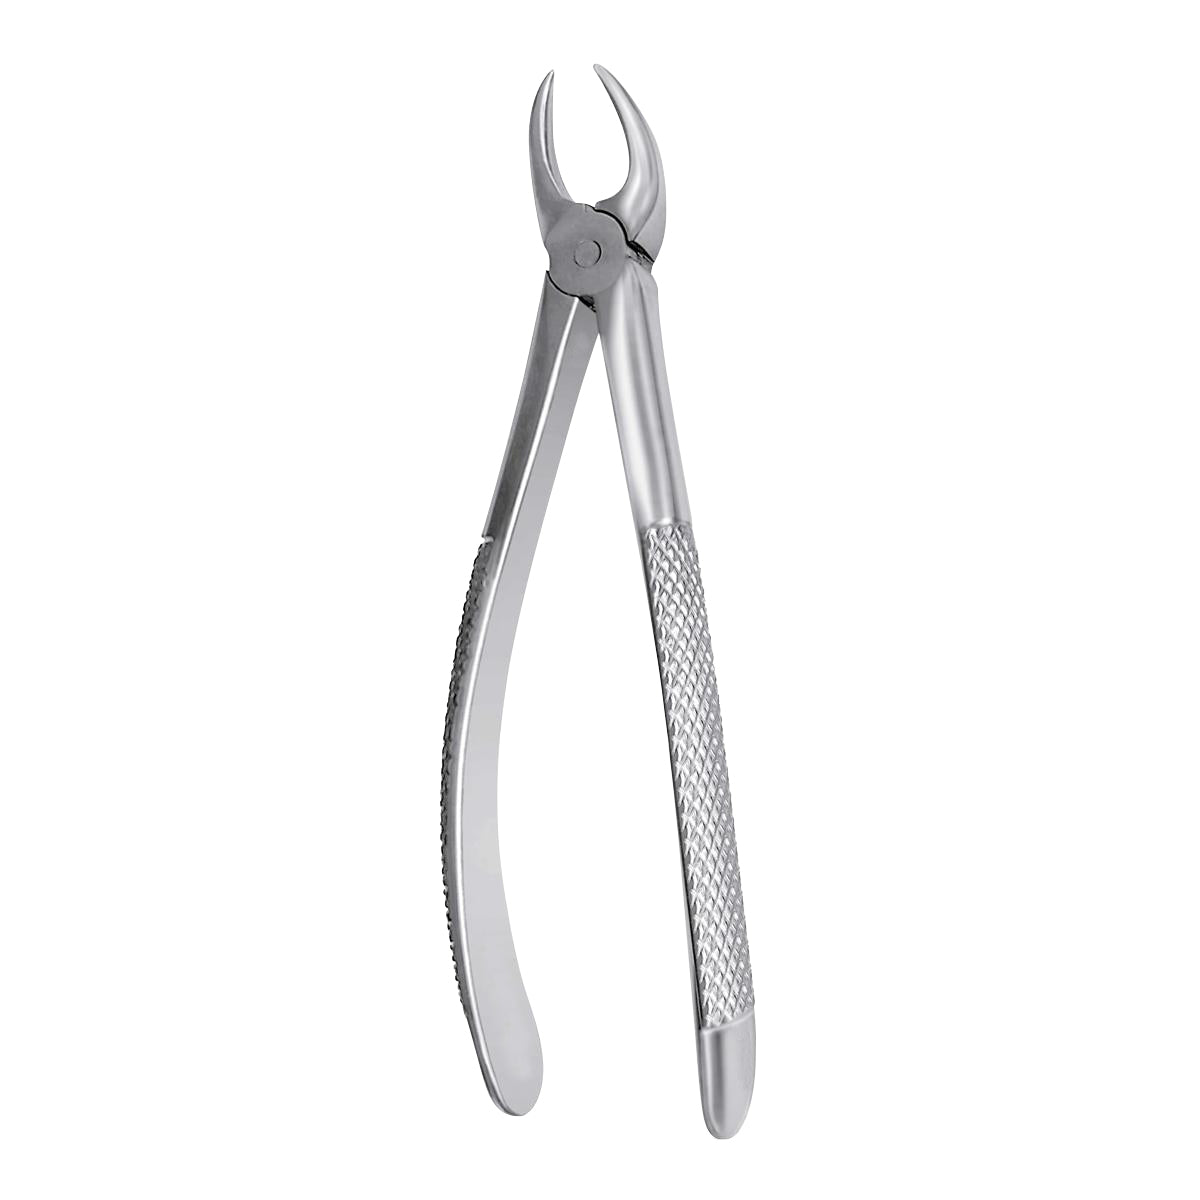 87 Lower Molars Extraction Forcep - HiTeck Medical Instruments